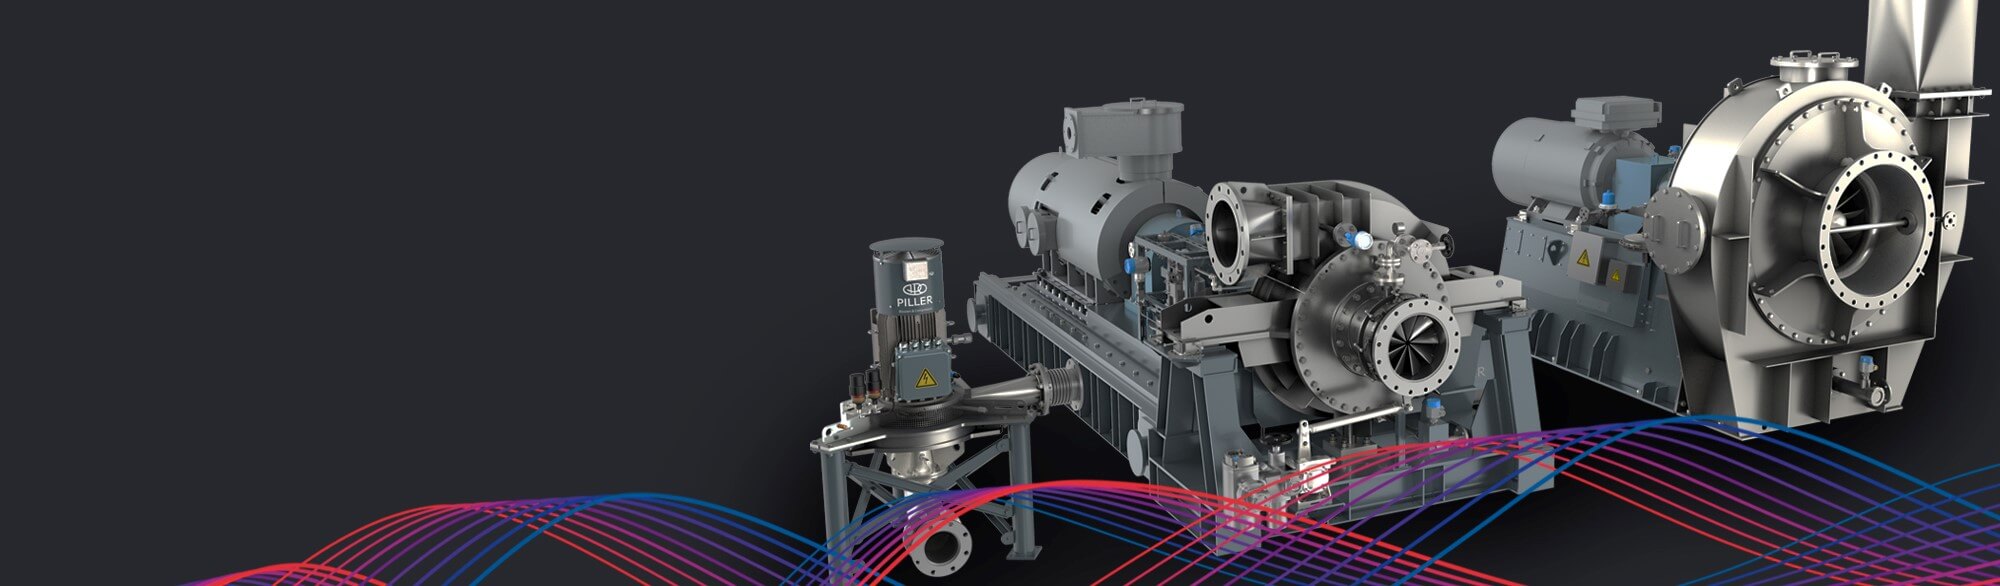 Centrifugal blowers & compressors for MVR processes